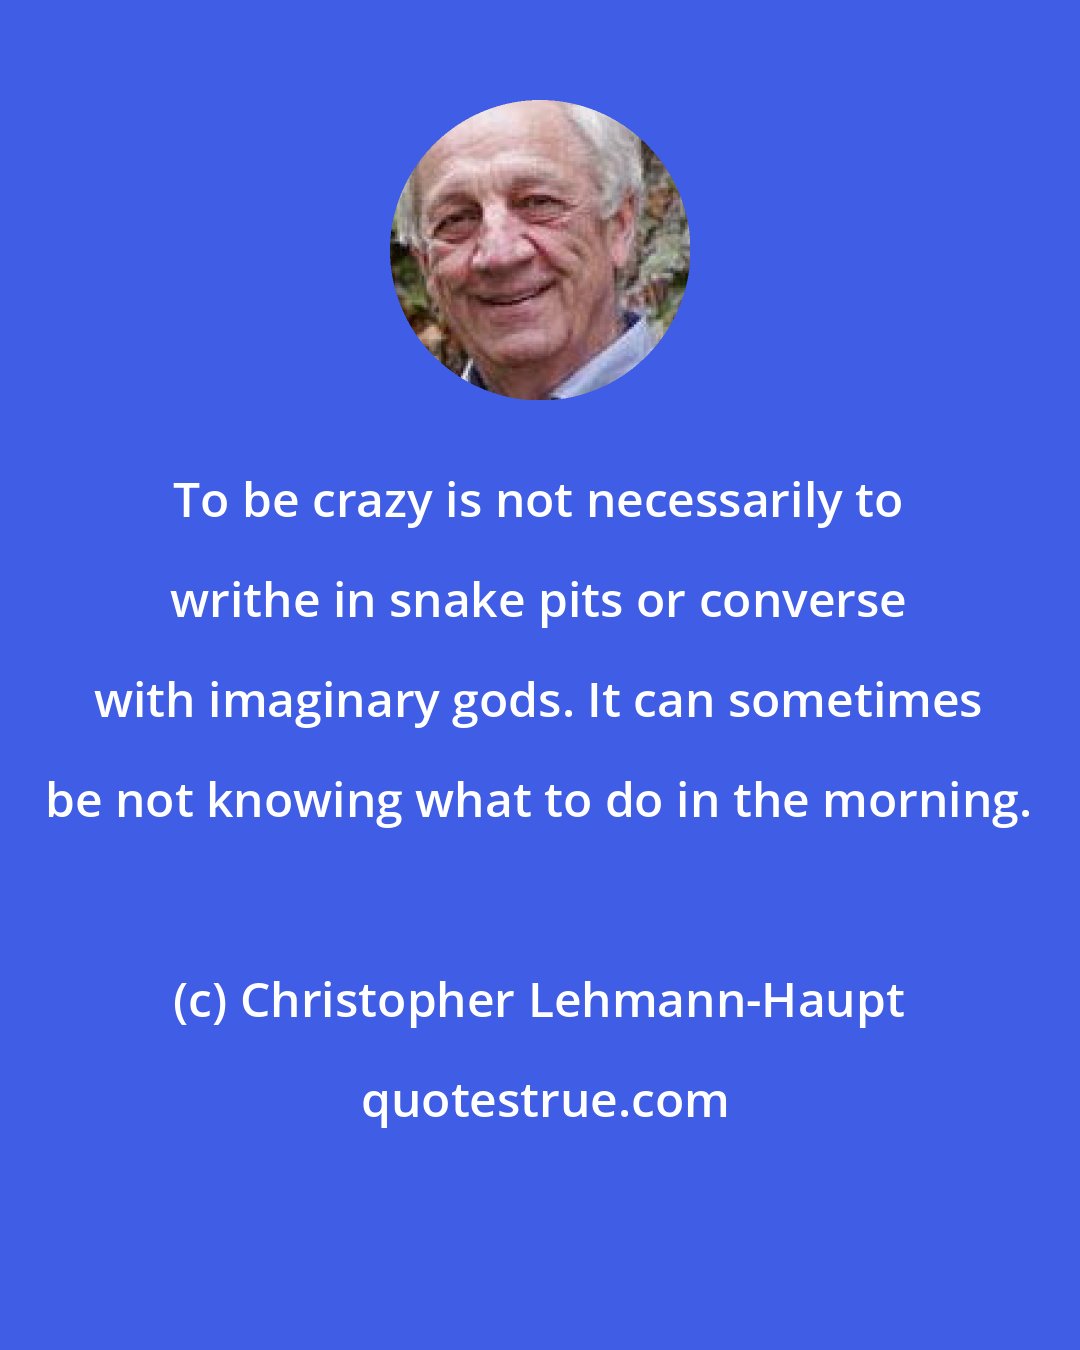 Christopher Lehmann-Haupt: To be crazy is not necessarily to writhe in snake pits or converse with imaginary gods. It can sometimes be not knowing what to do in the morning.